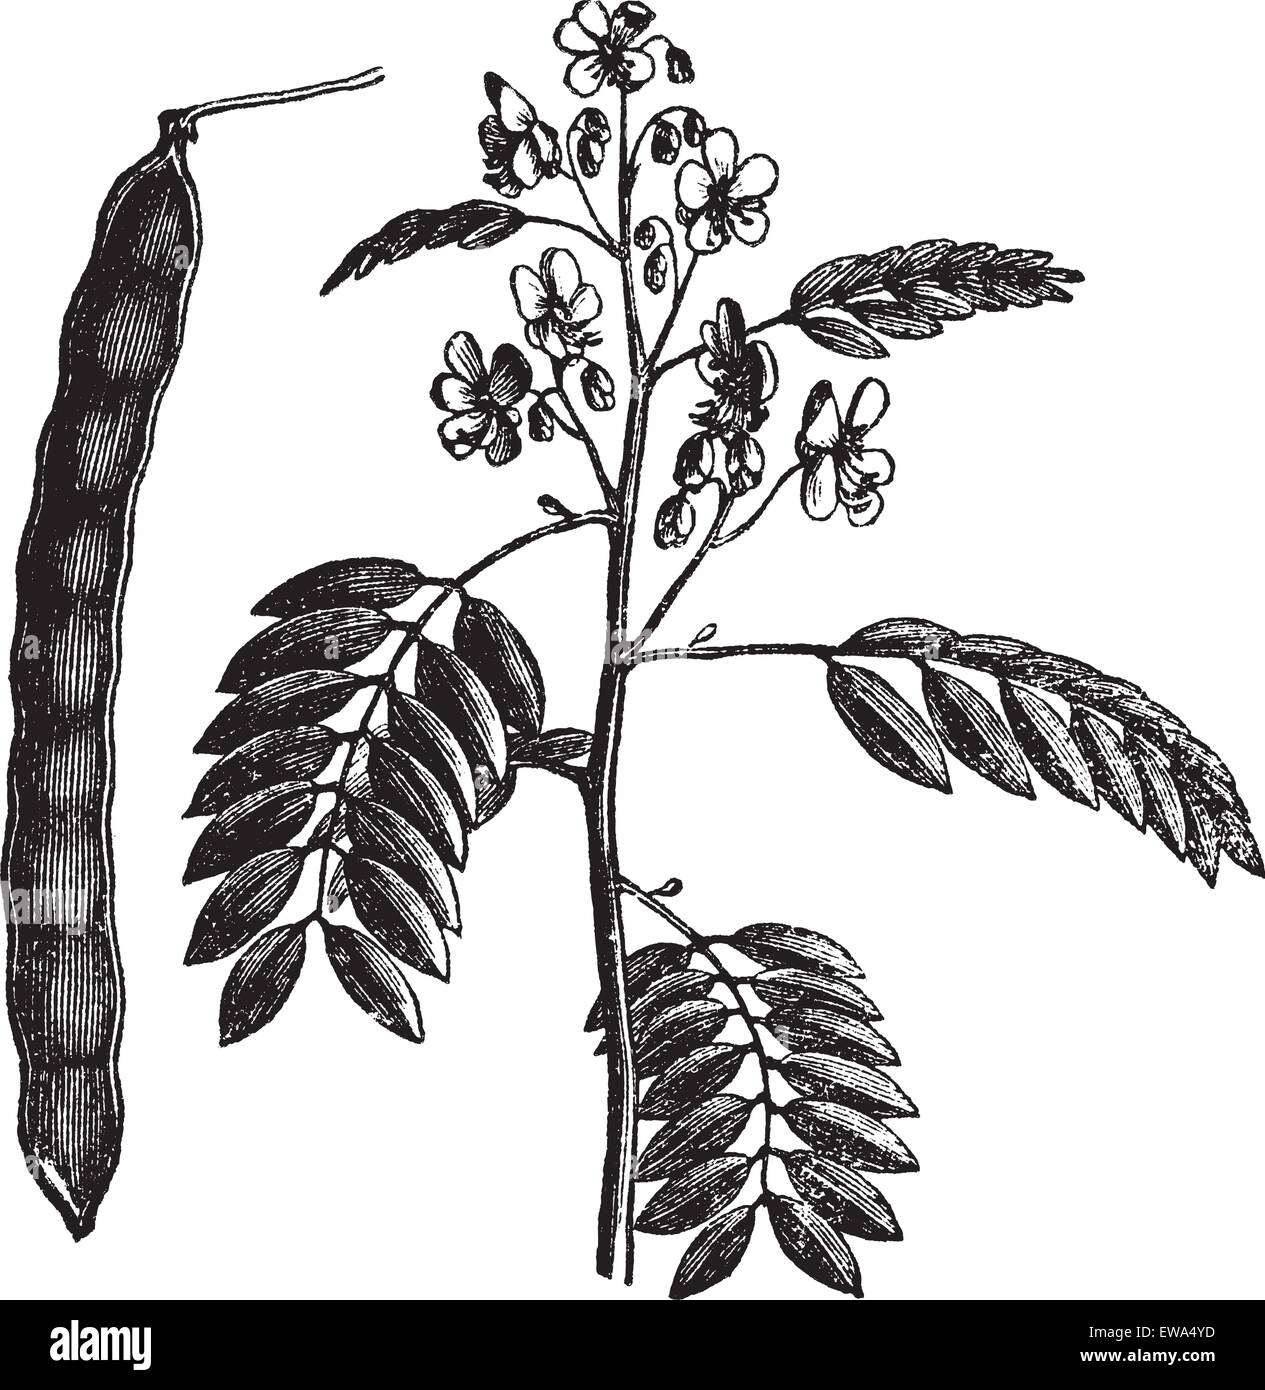 American Senna or Senna hebecarpa or Wild Senna or Cassia hebecarpa or Senna hebecarpa, vintage engraving. Old engraved illustration of American Senna isolated on a white background. Stock Vector